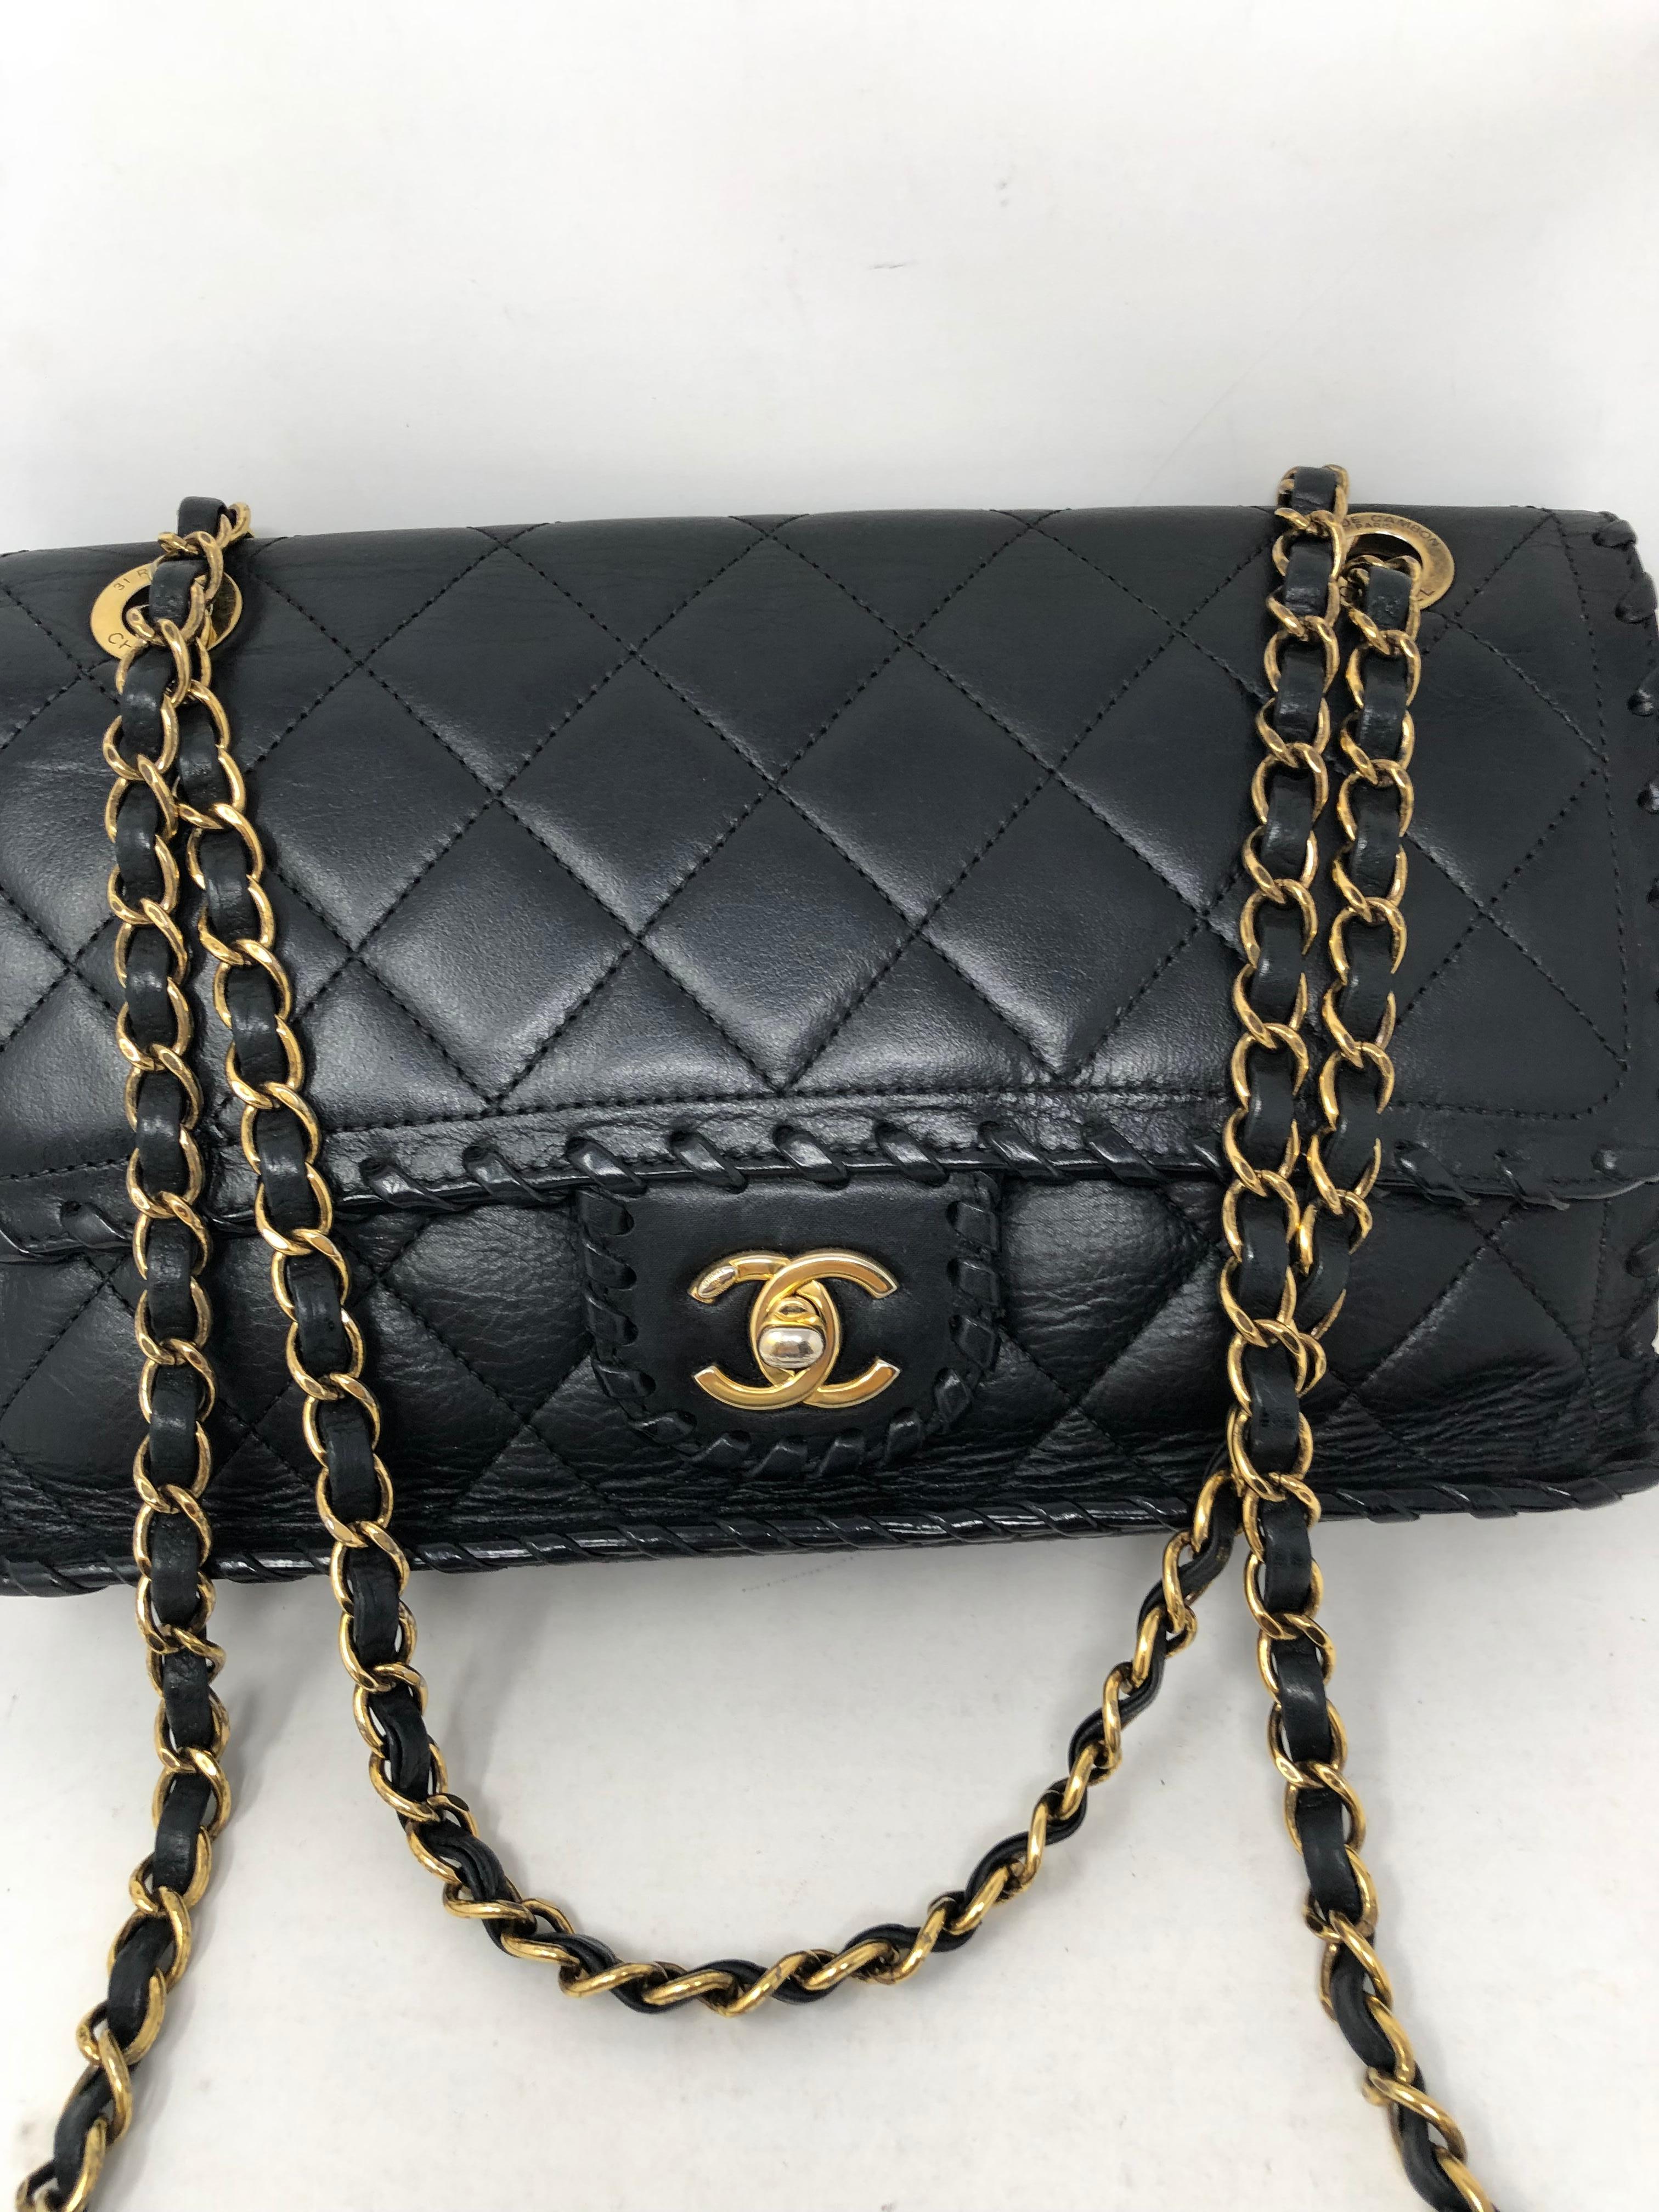 Chanel Whipstitch Classic Flap Bag. Mattelase leather with antique gold hardware. Bag can be worn doubled or as a crossbody.  Mint like new condition. Authenticity card included. Guaranteed authentic. 